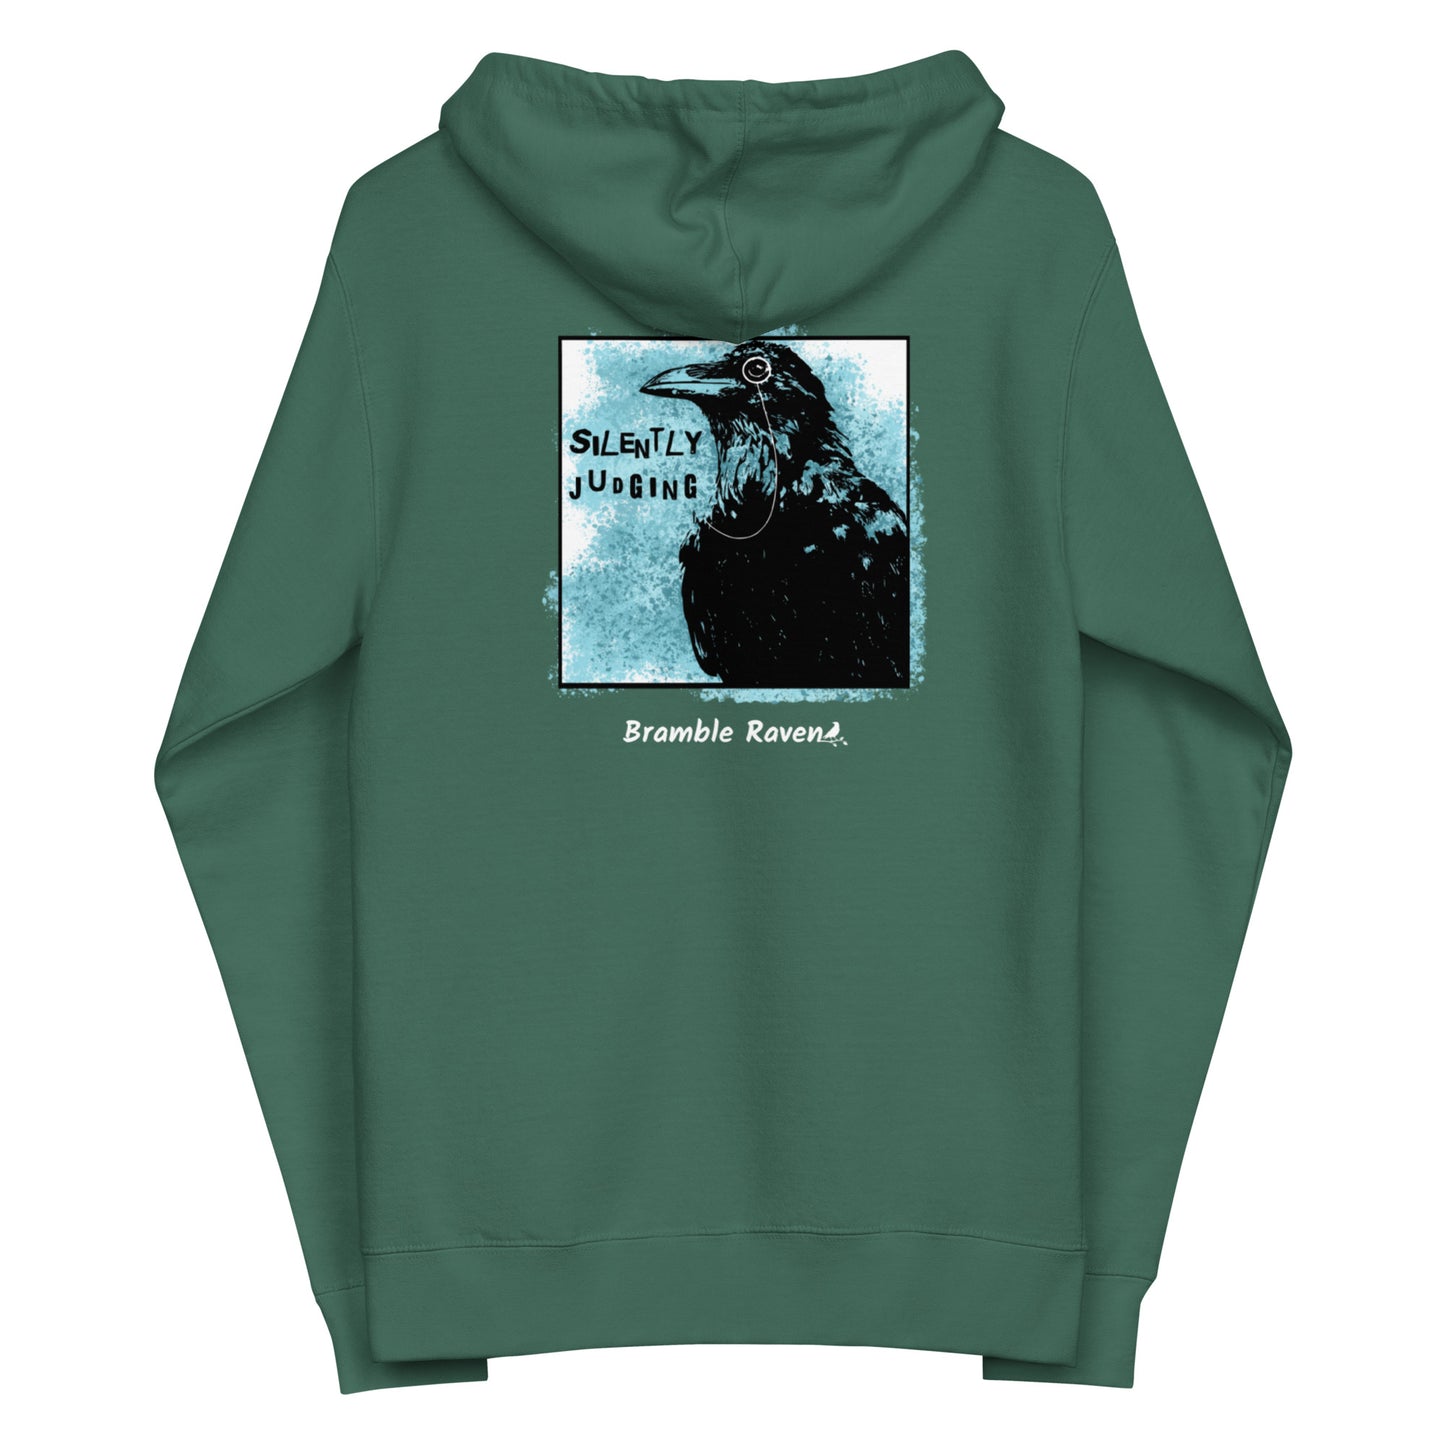 Unisex fleece-lined alpine green colored zip-up hoodie with silently judging text by black crow wearing a monocle in a square with blue paint splatters.  Design on the back of hoodie.